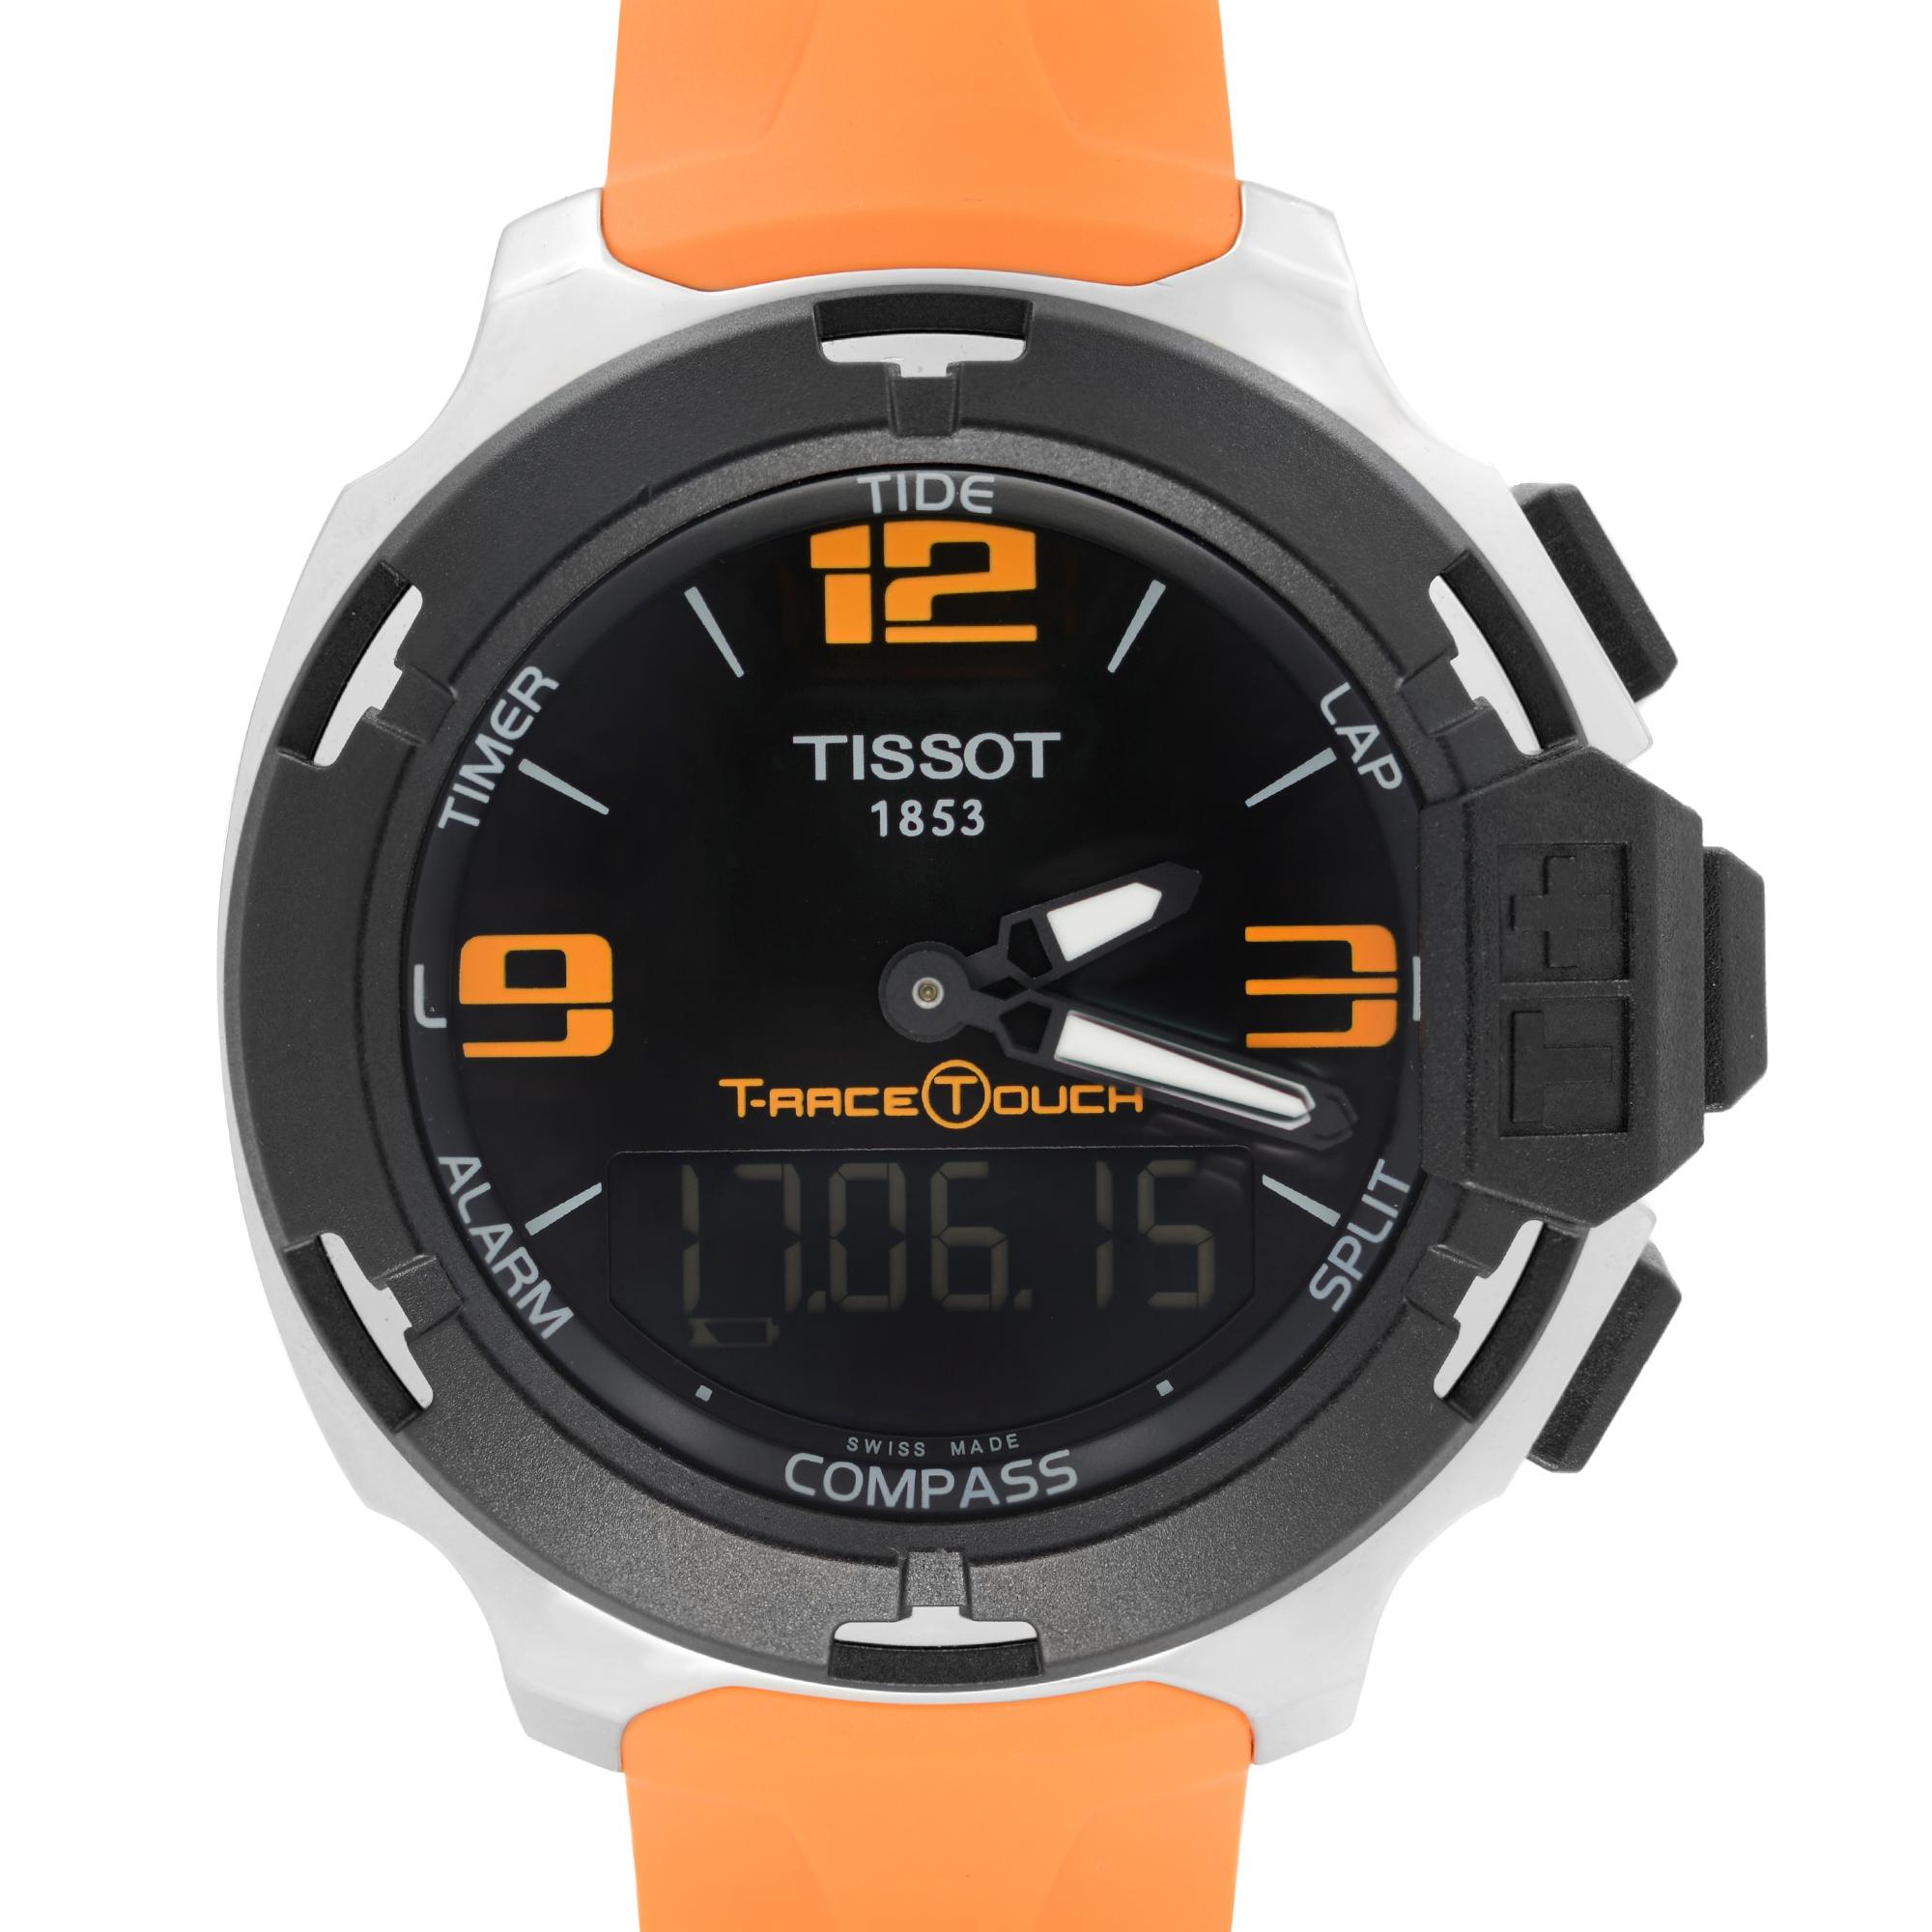 Unworn Tissot T-Race Touch Stainless Steel Orange Rubber Band Black Dial Quartz Mens Watch T081.420.17.057.02. This Beautiful Timepiece is Powered by Quartz (Battery) Movement and Features: Round Stainless Steel Case with a Orange Rubber Strap,